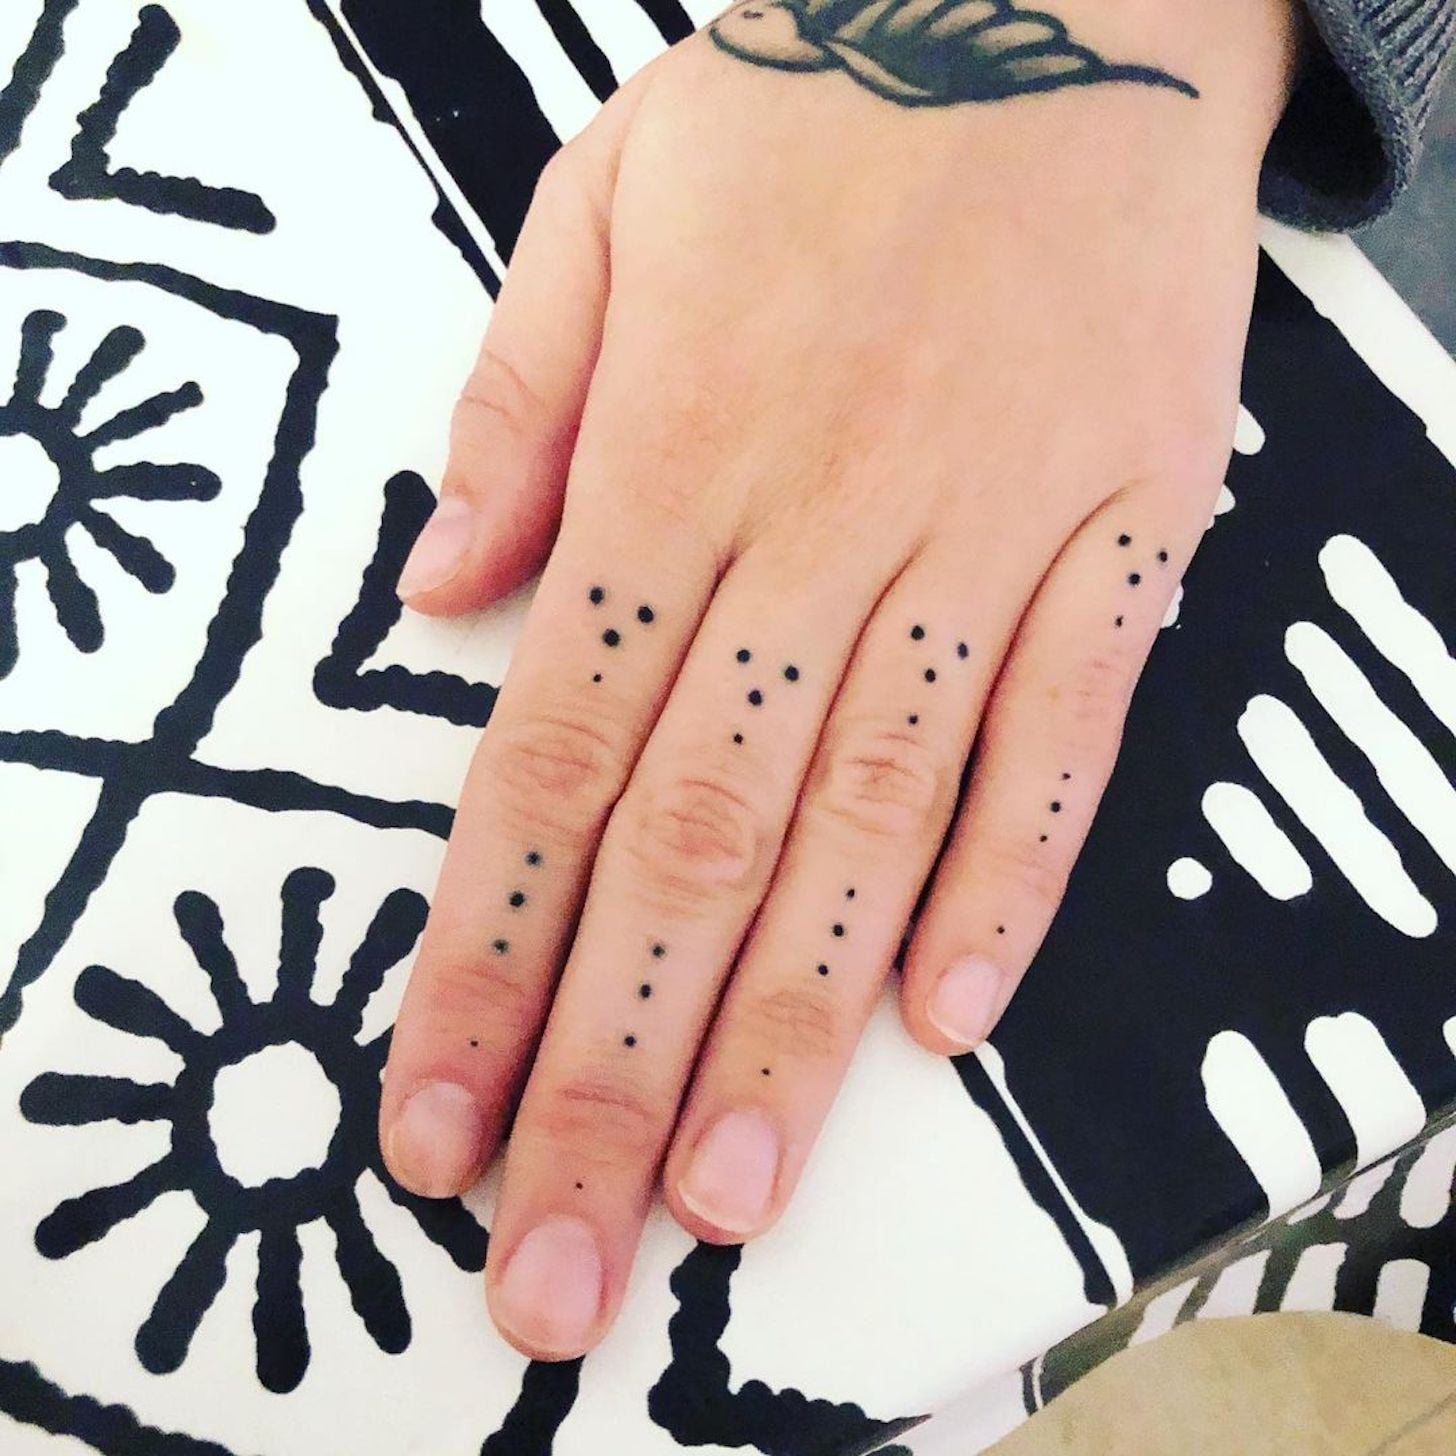 Dotwork Tattoos and All About Its' History, Features, Design Ideas